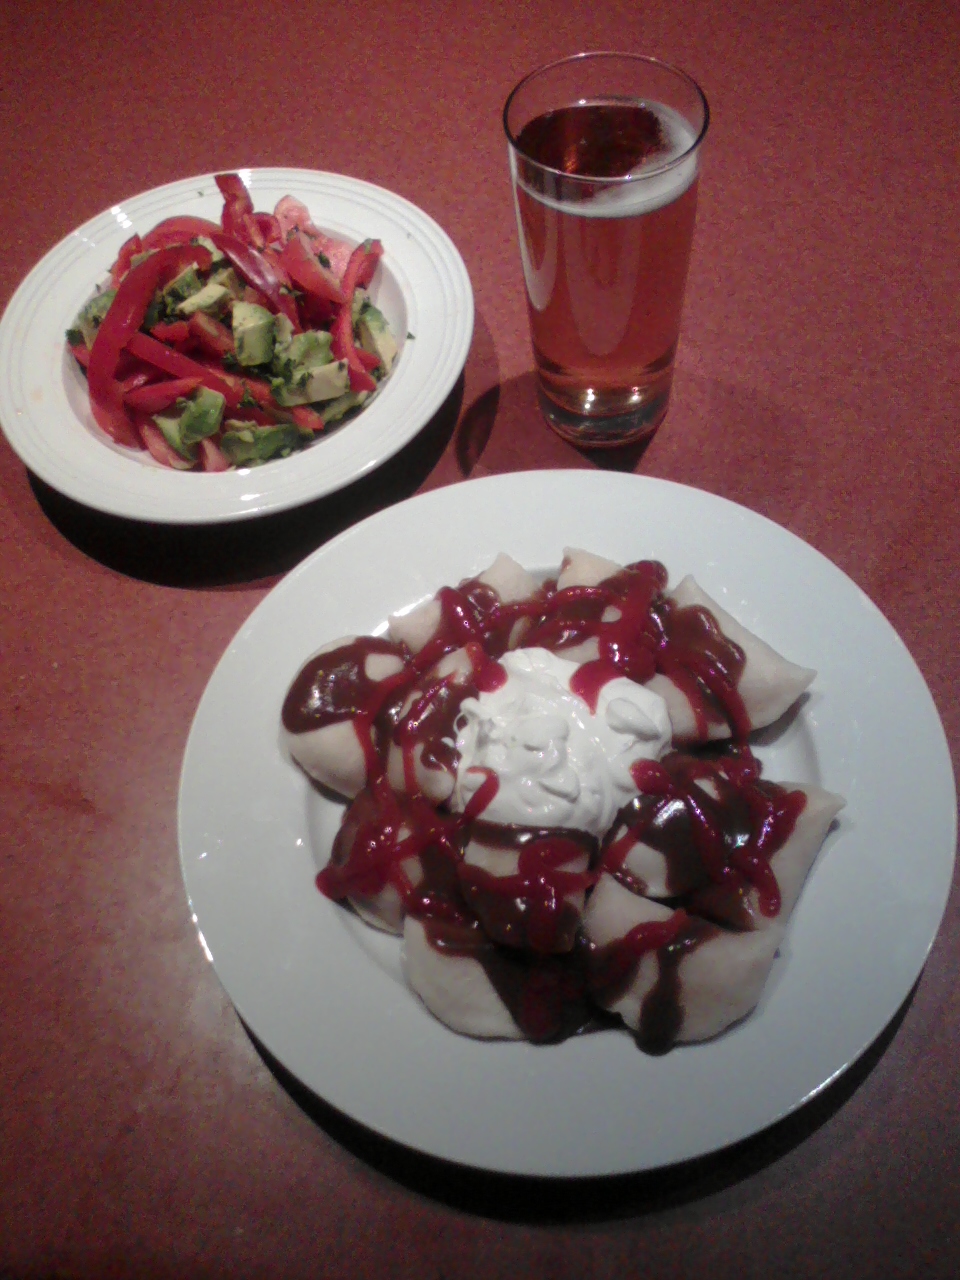 Salad and perogie poutine!